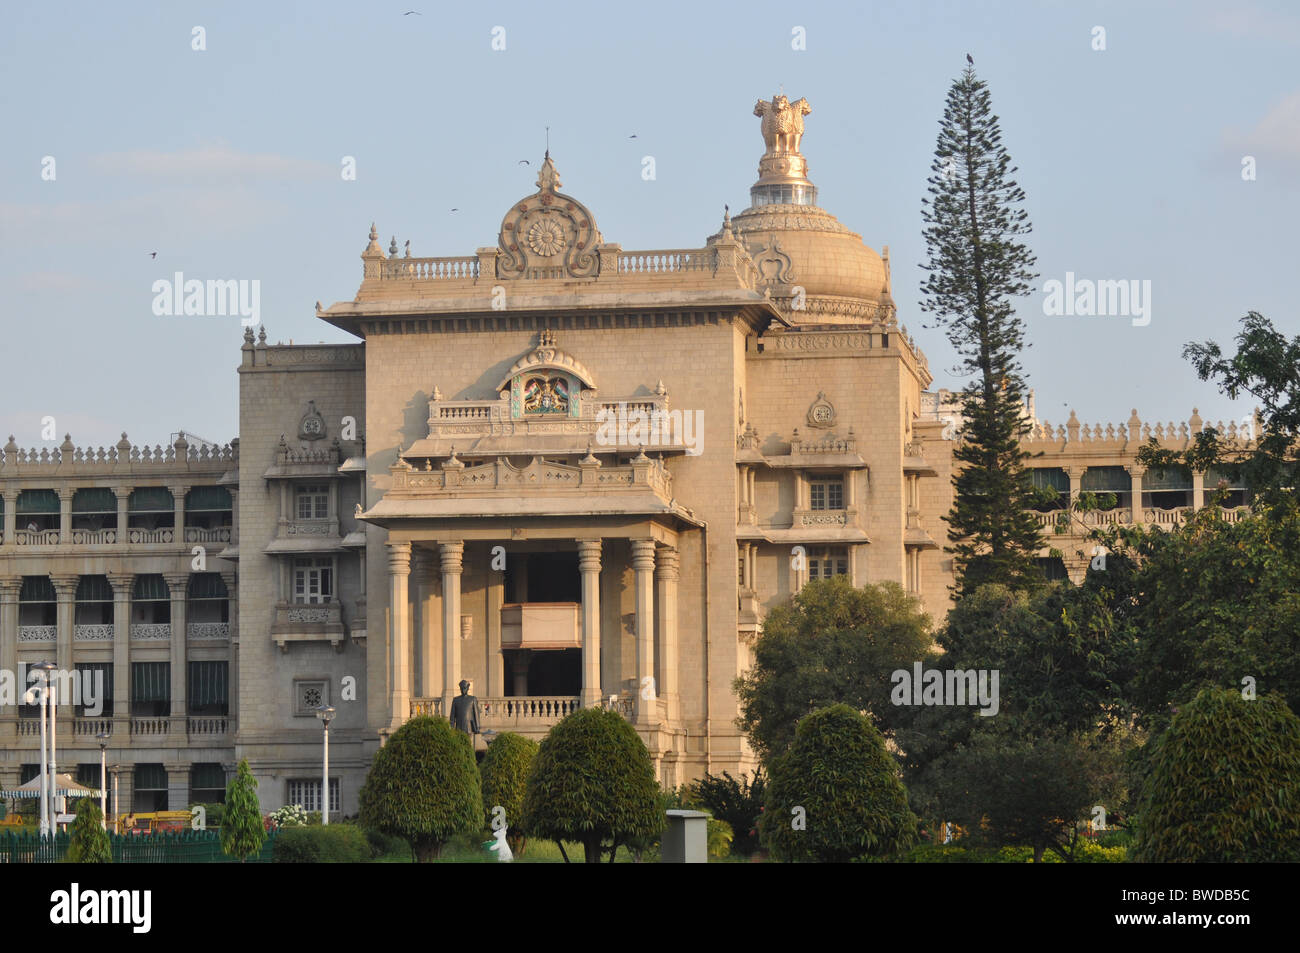 A side view of the local house of legislatures at Bengaluru (Bangalore), India Stock Photo